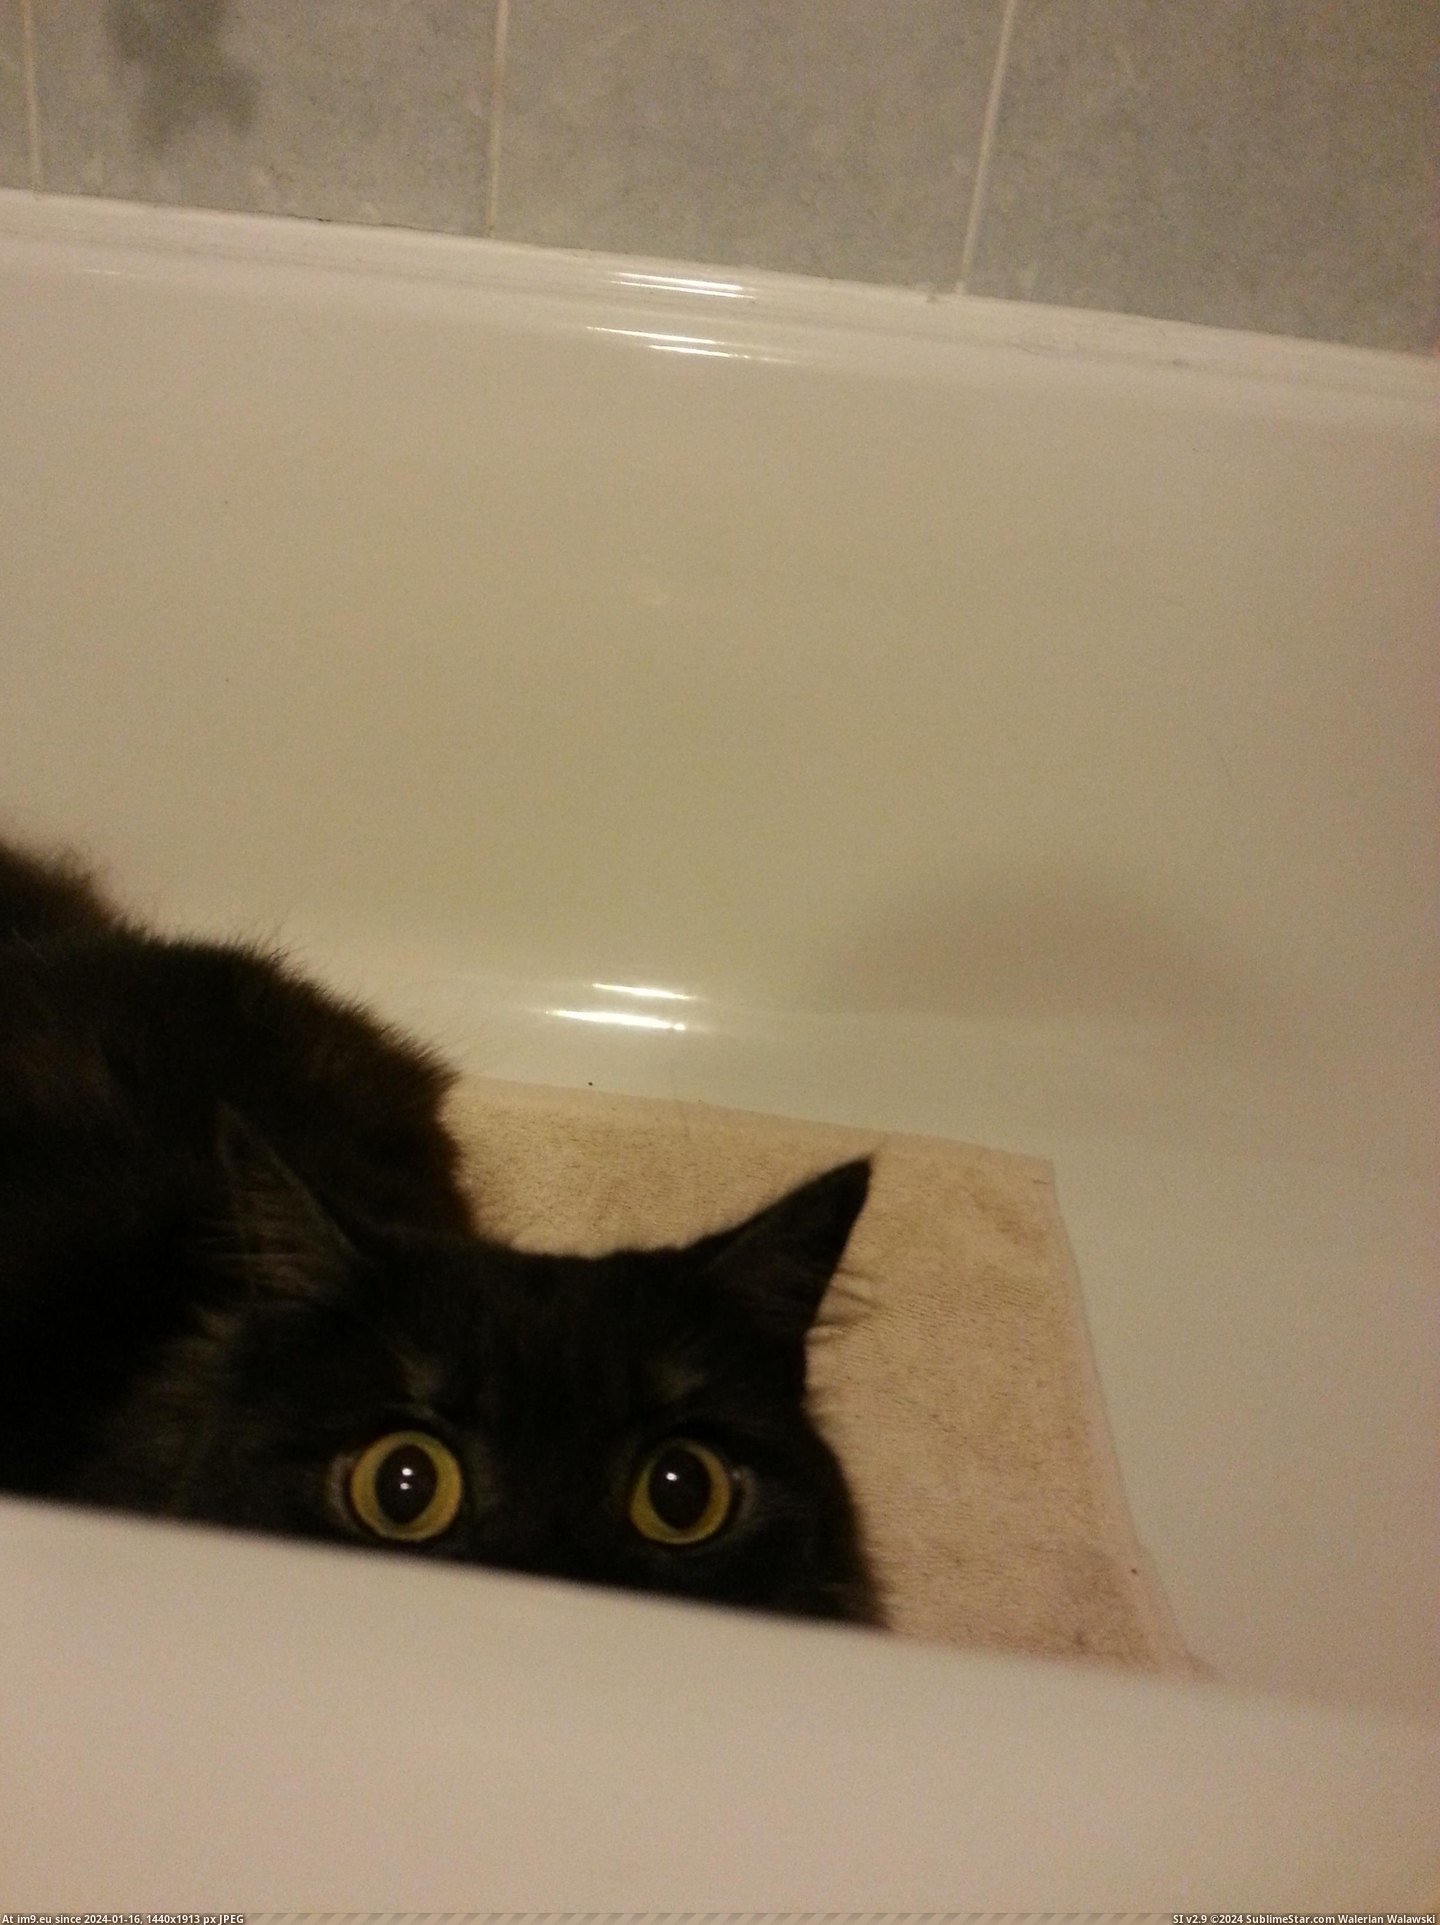 #Cats  #Watch [Cats] I watch you pee Pic. (Изображение из альбом My r/CATS favs))